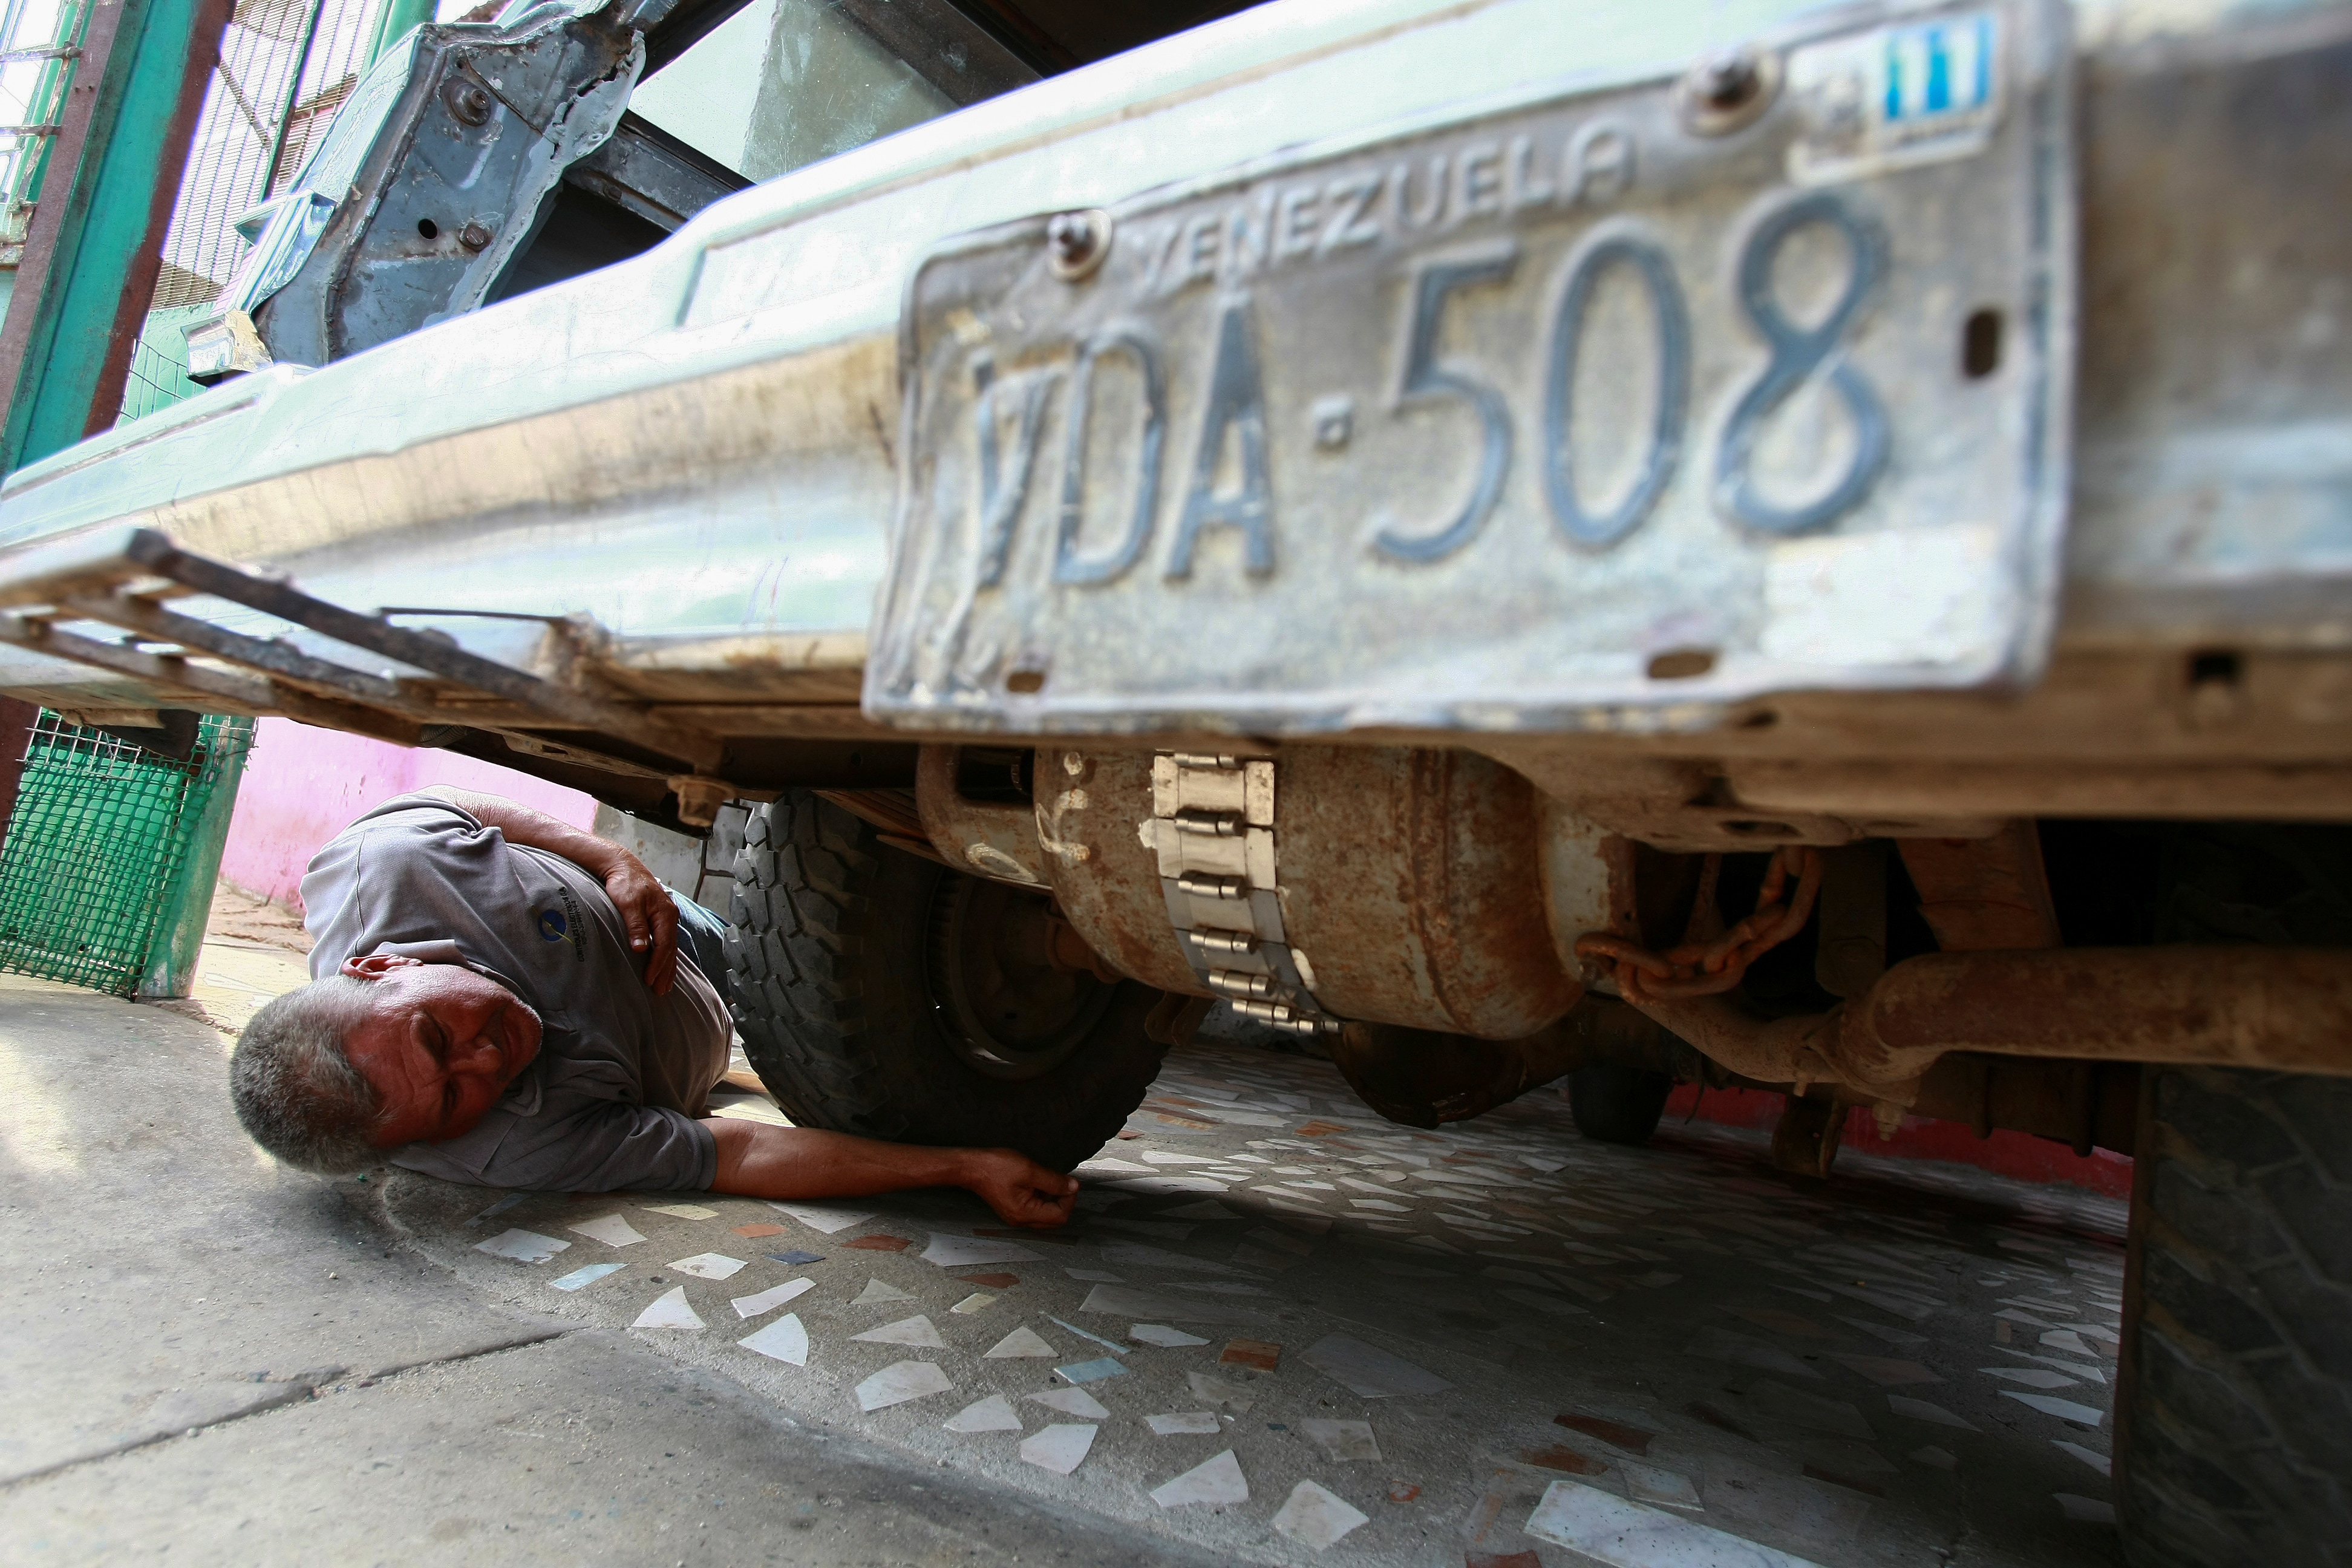 File photo: Alfredo Gonzalez checks a cooking gas canister beneath his car, which is used to run his vehicle instead of fuel, as Venezuelans are struggling to cope with chronic fuel shortage.